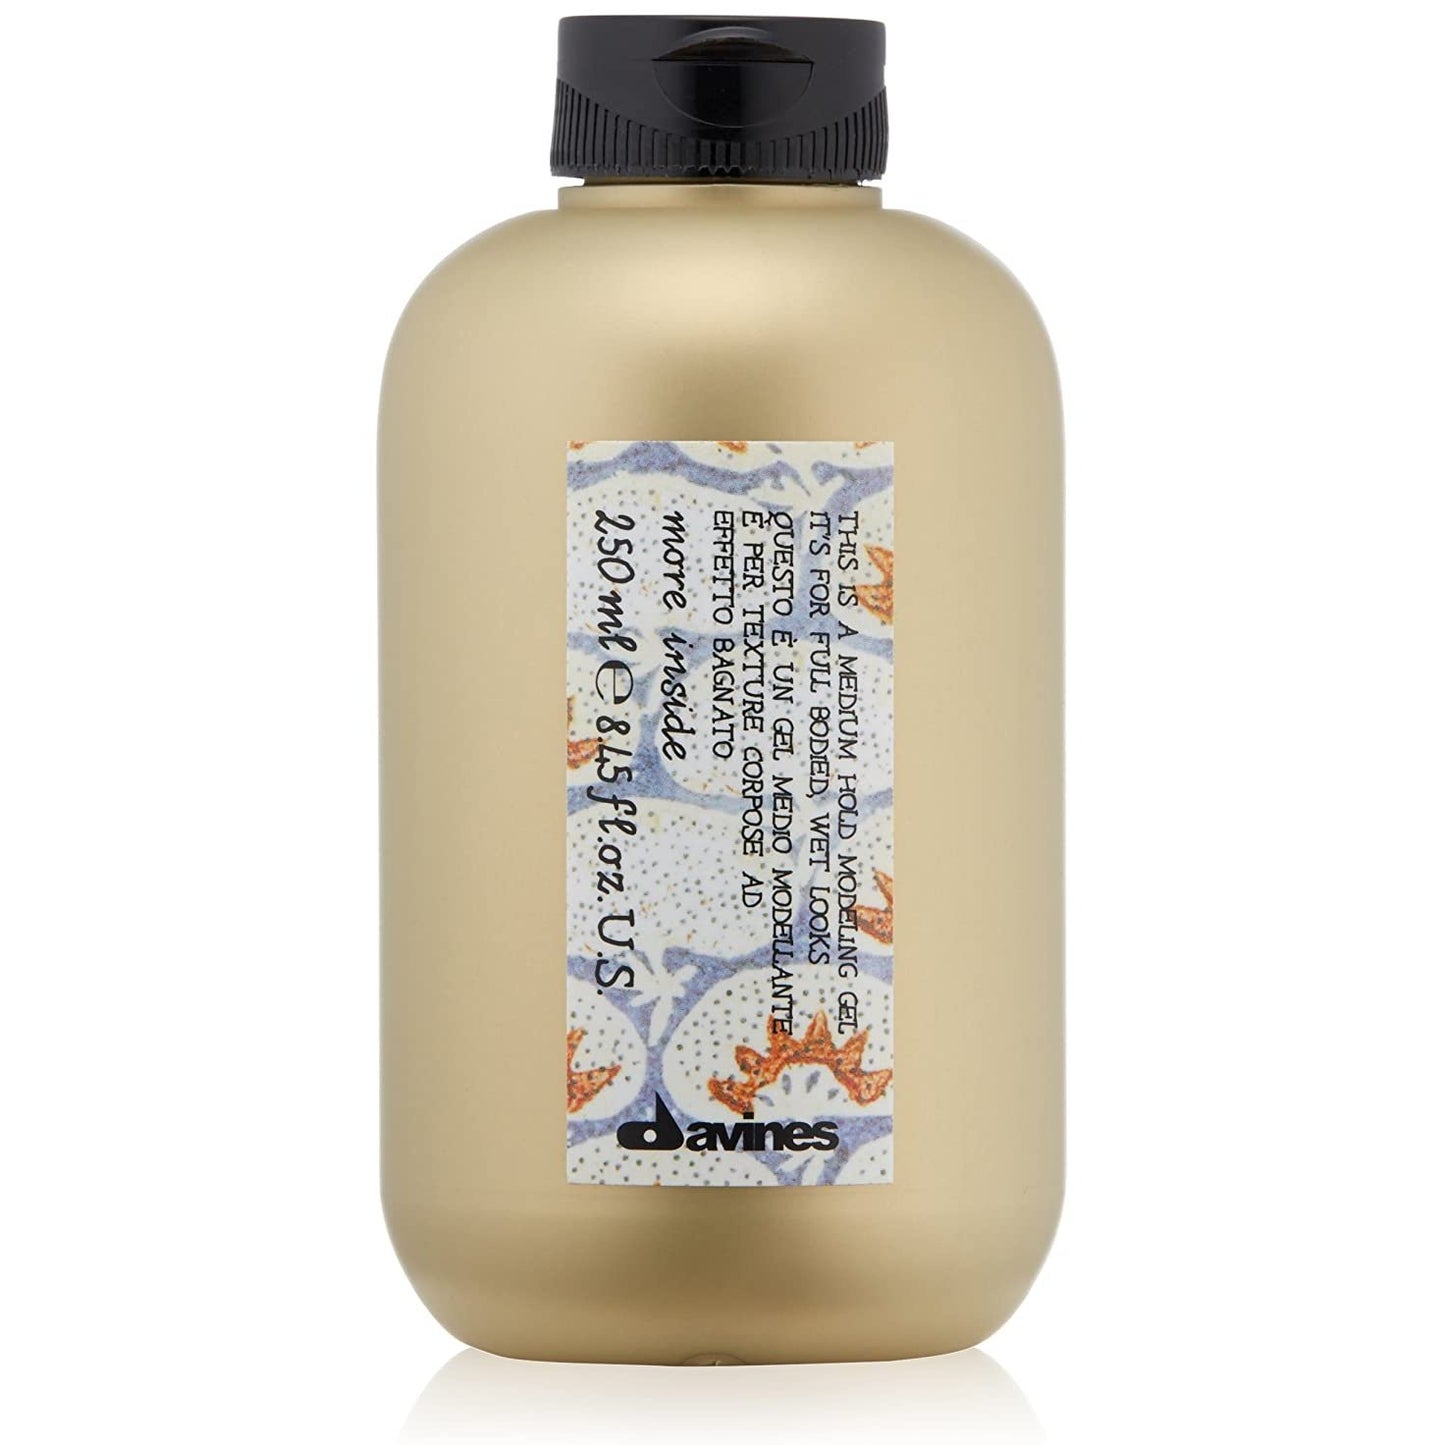 Davines This is a Medium Hold Modeling Gel, 8.45 oz